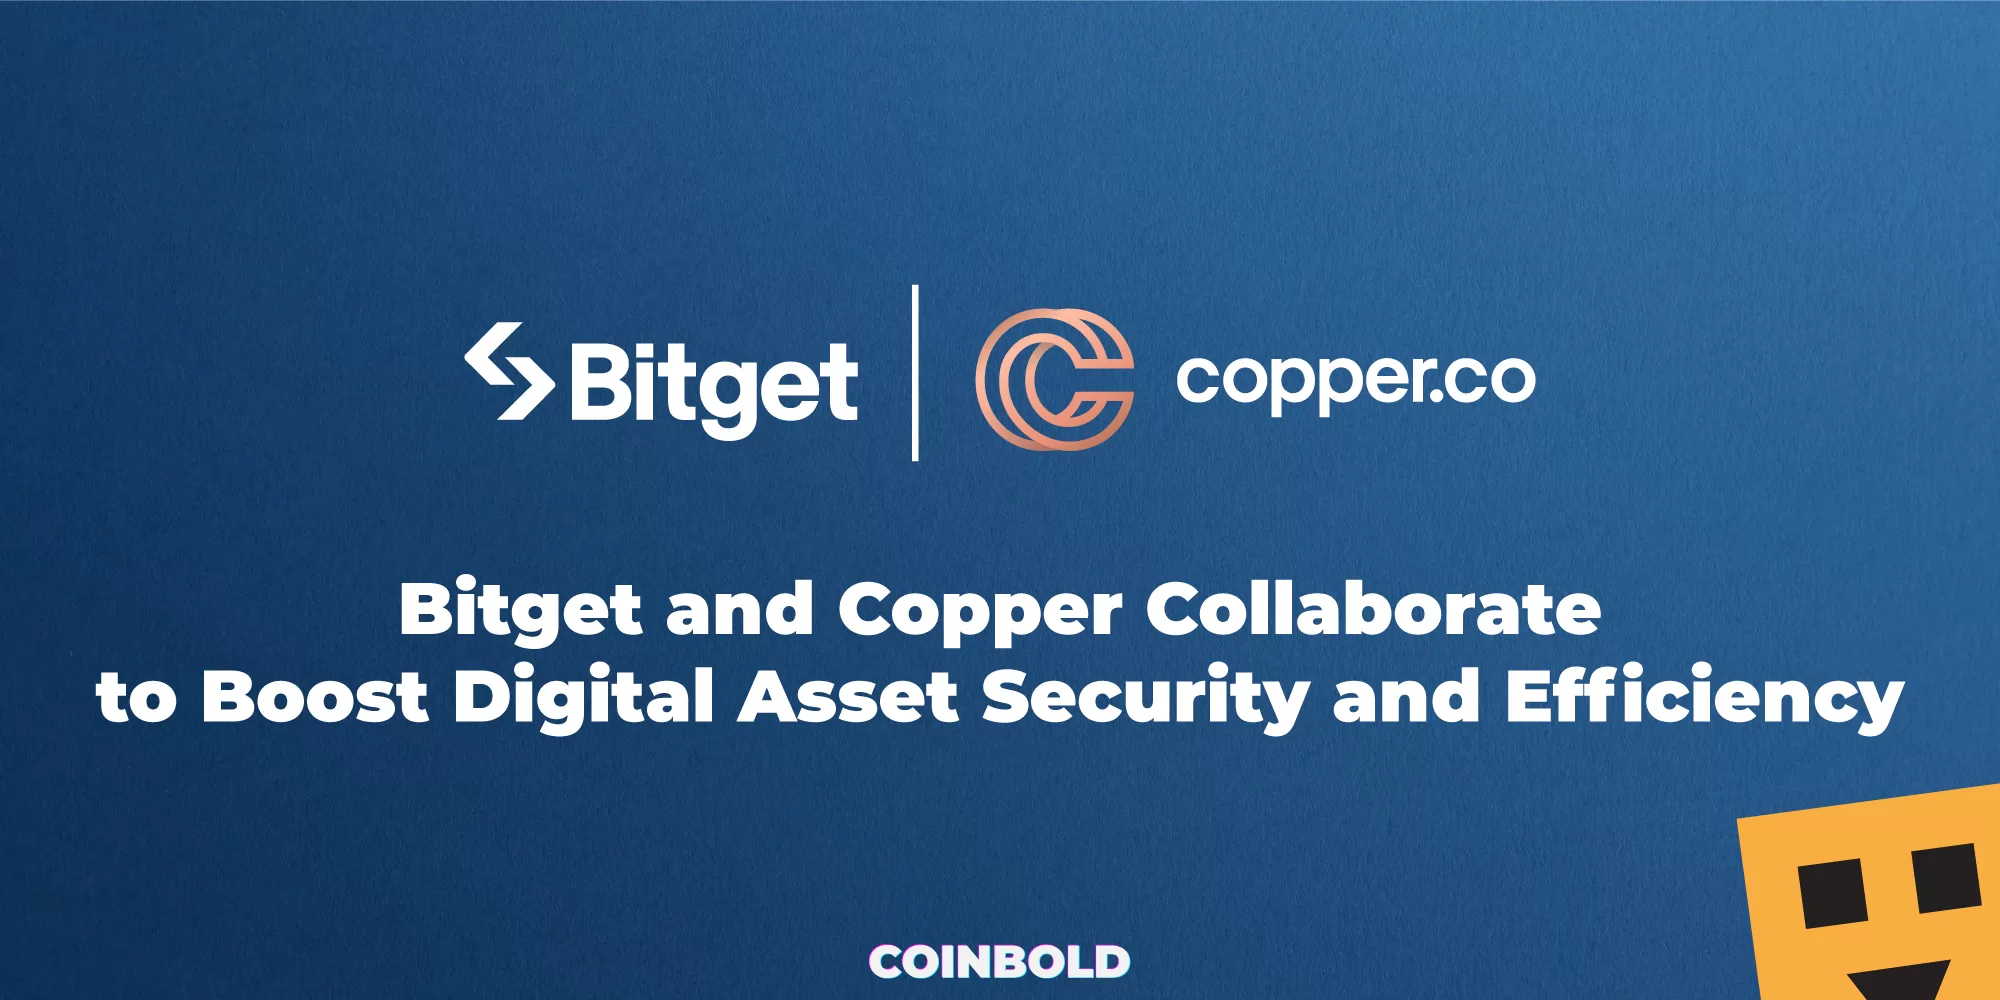 Bitget and Copper Collaborate to Boost Digital Asset Security and Efficiency